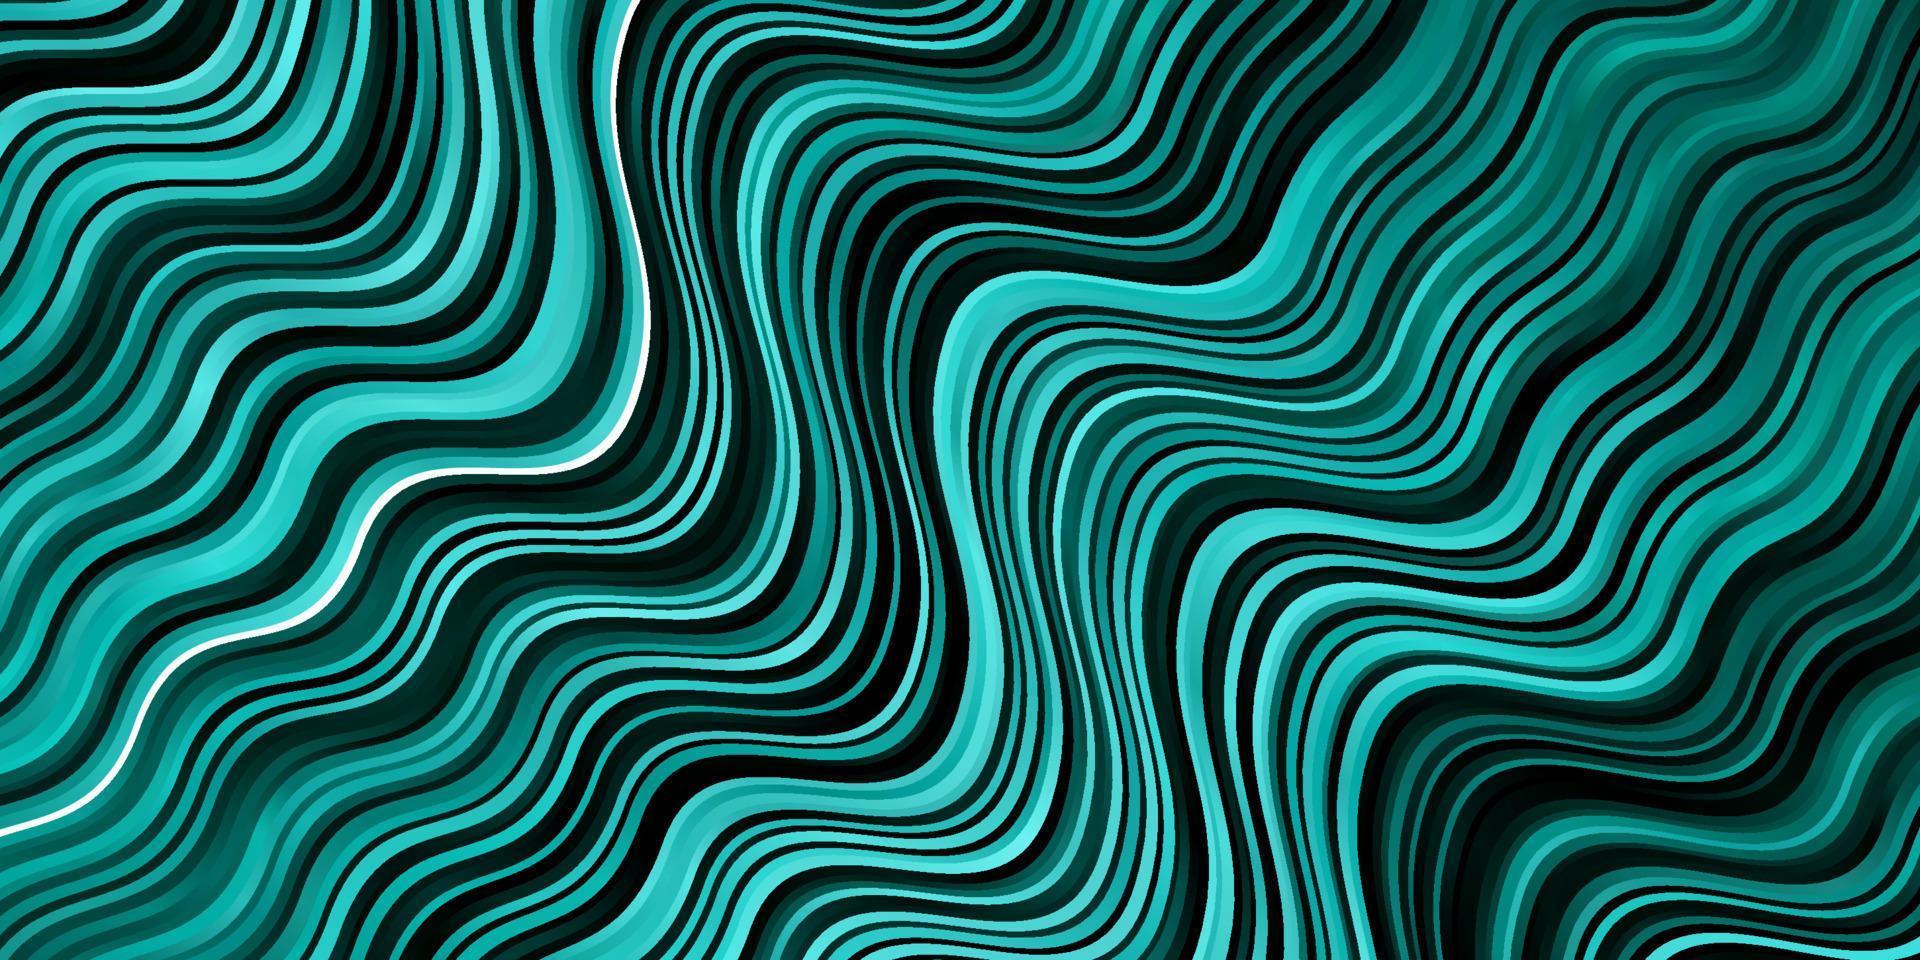 Light Green vector pattern with curves.